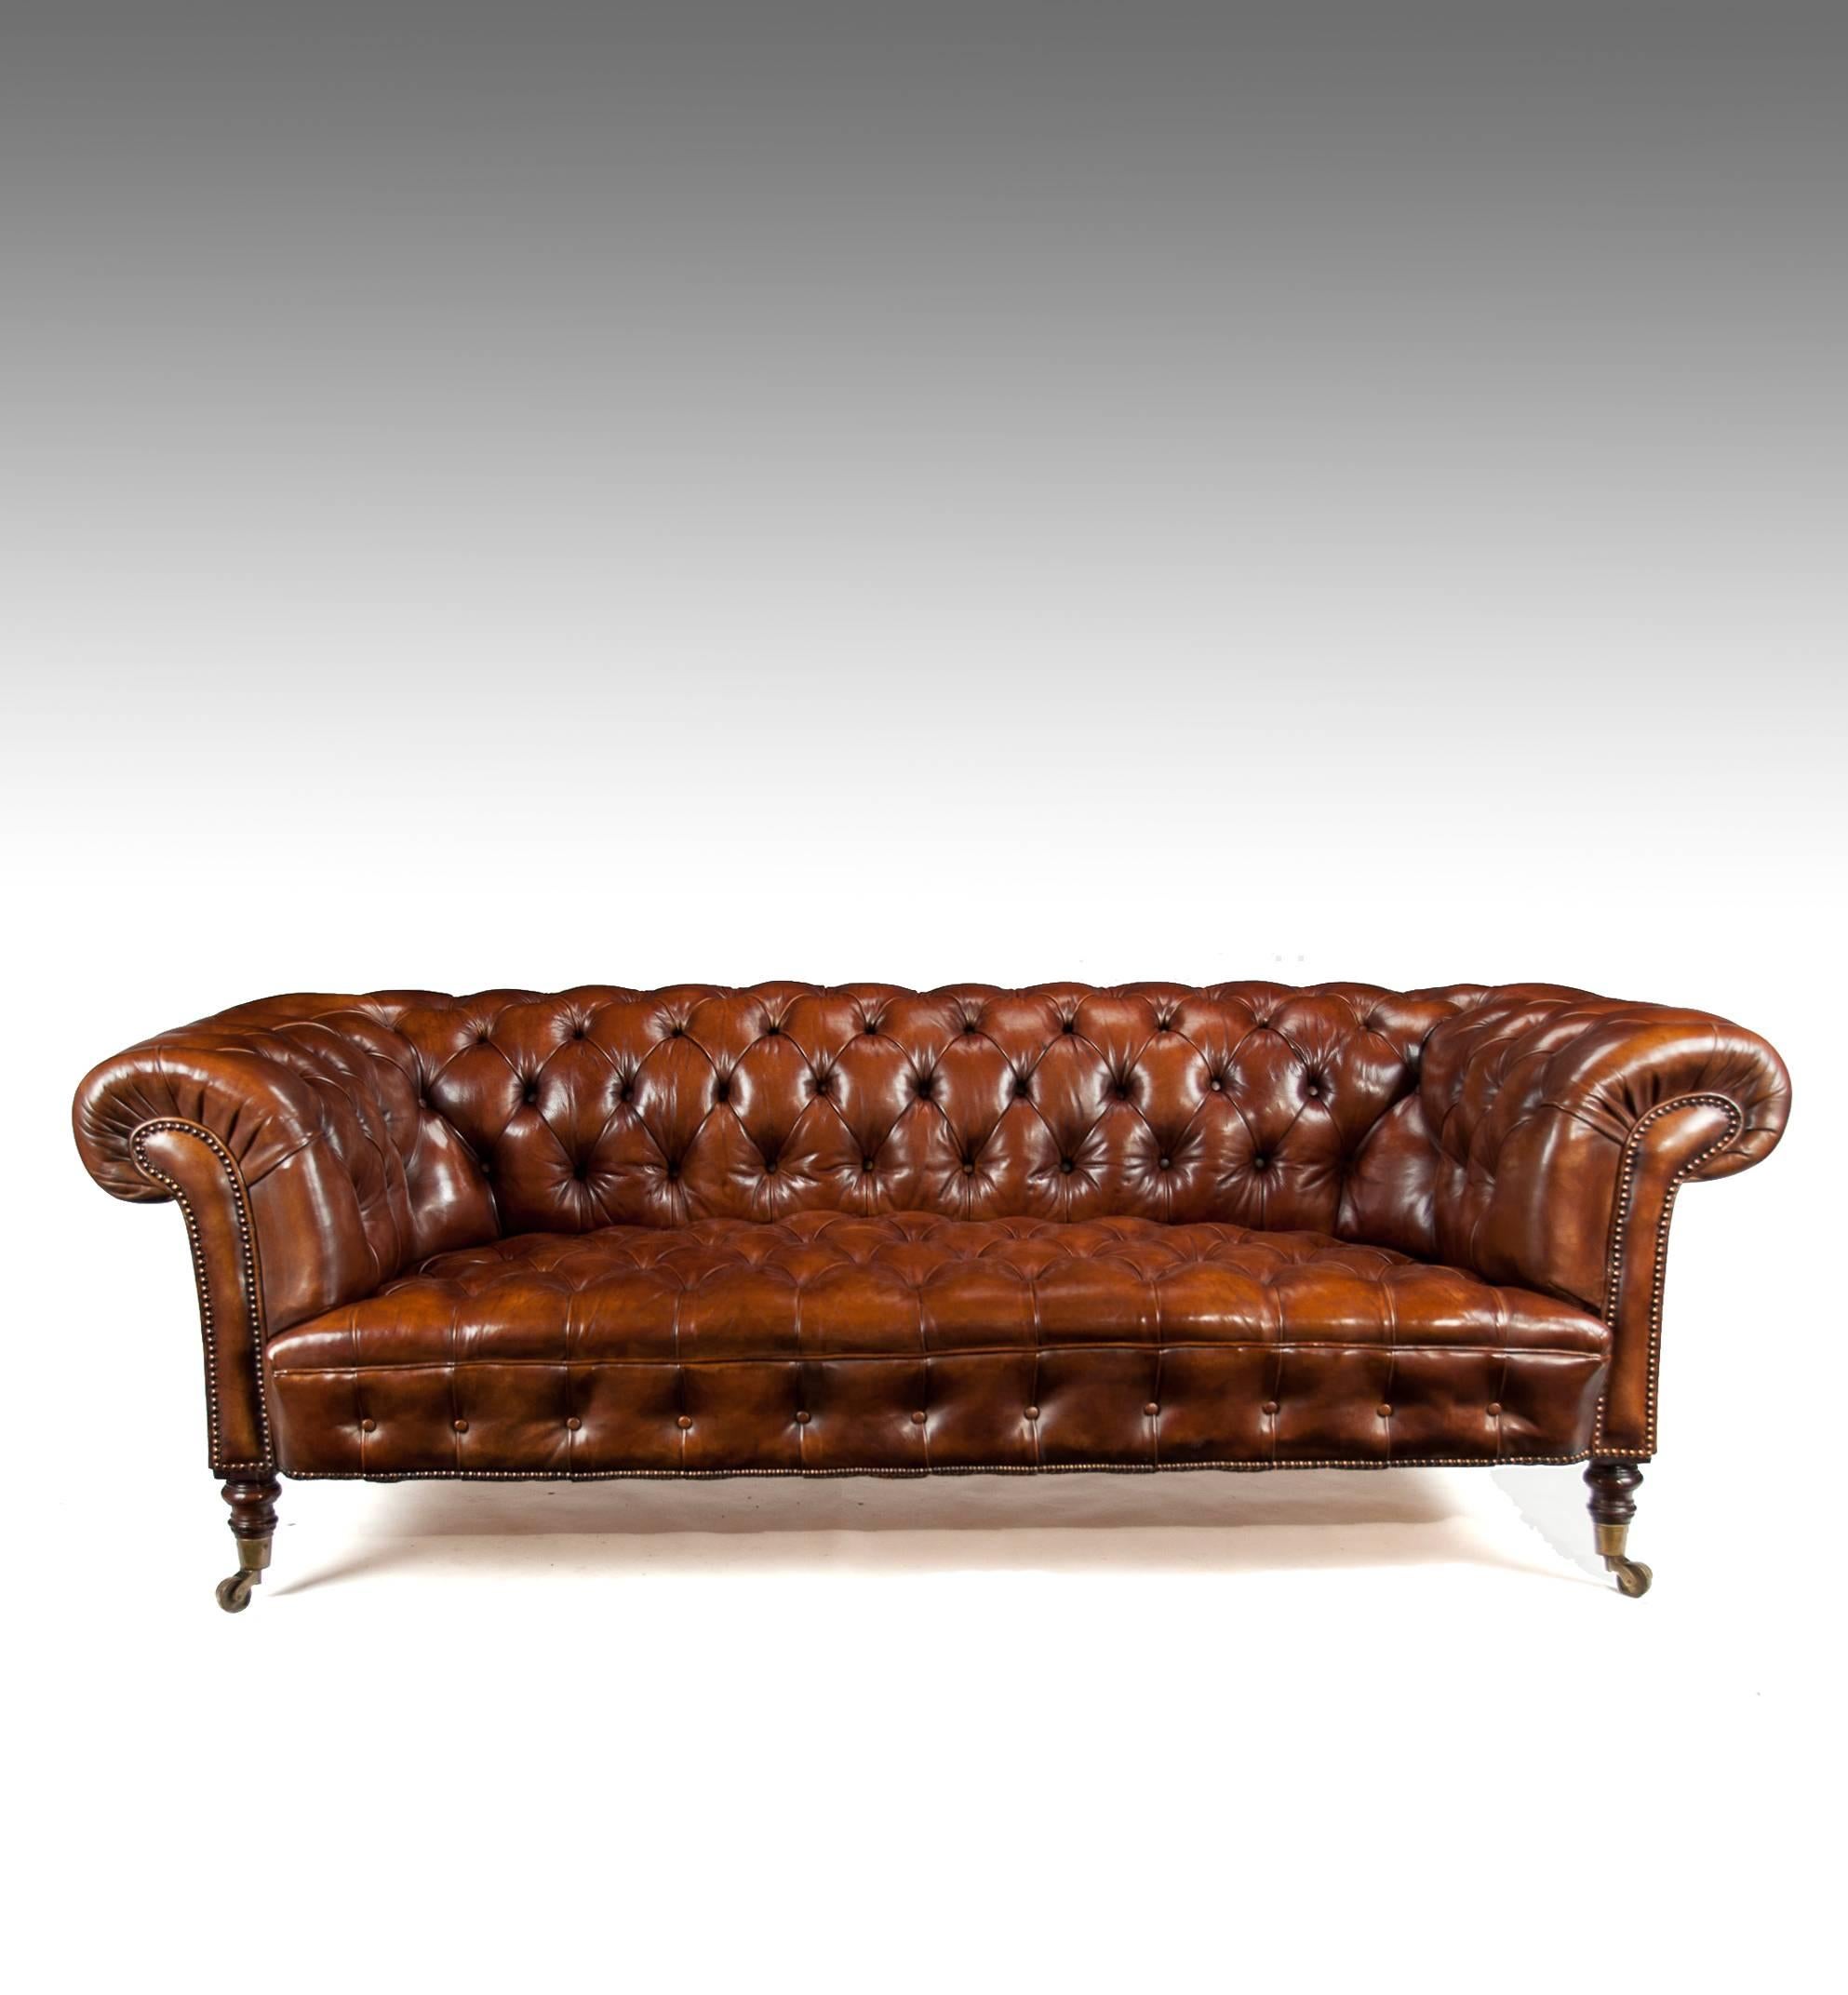 English Fine Antique 19th Century Leather Upholstered Chesterfield